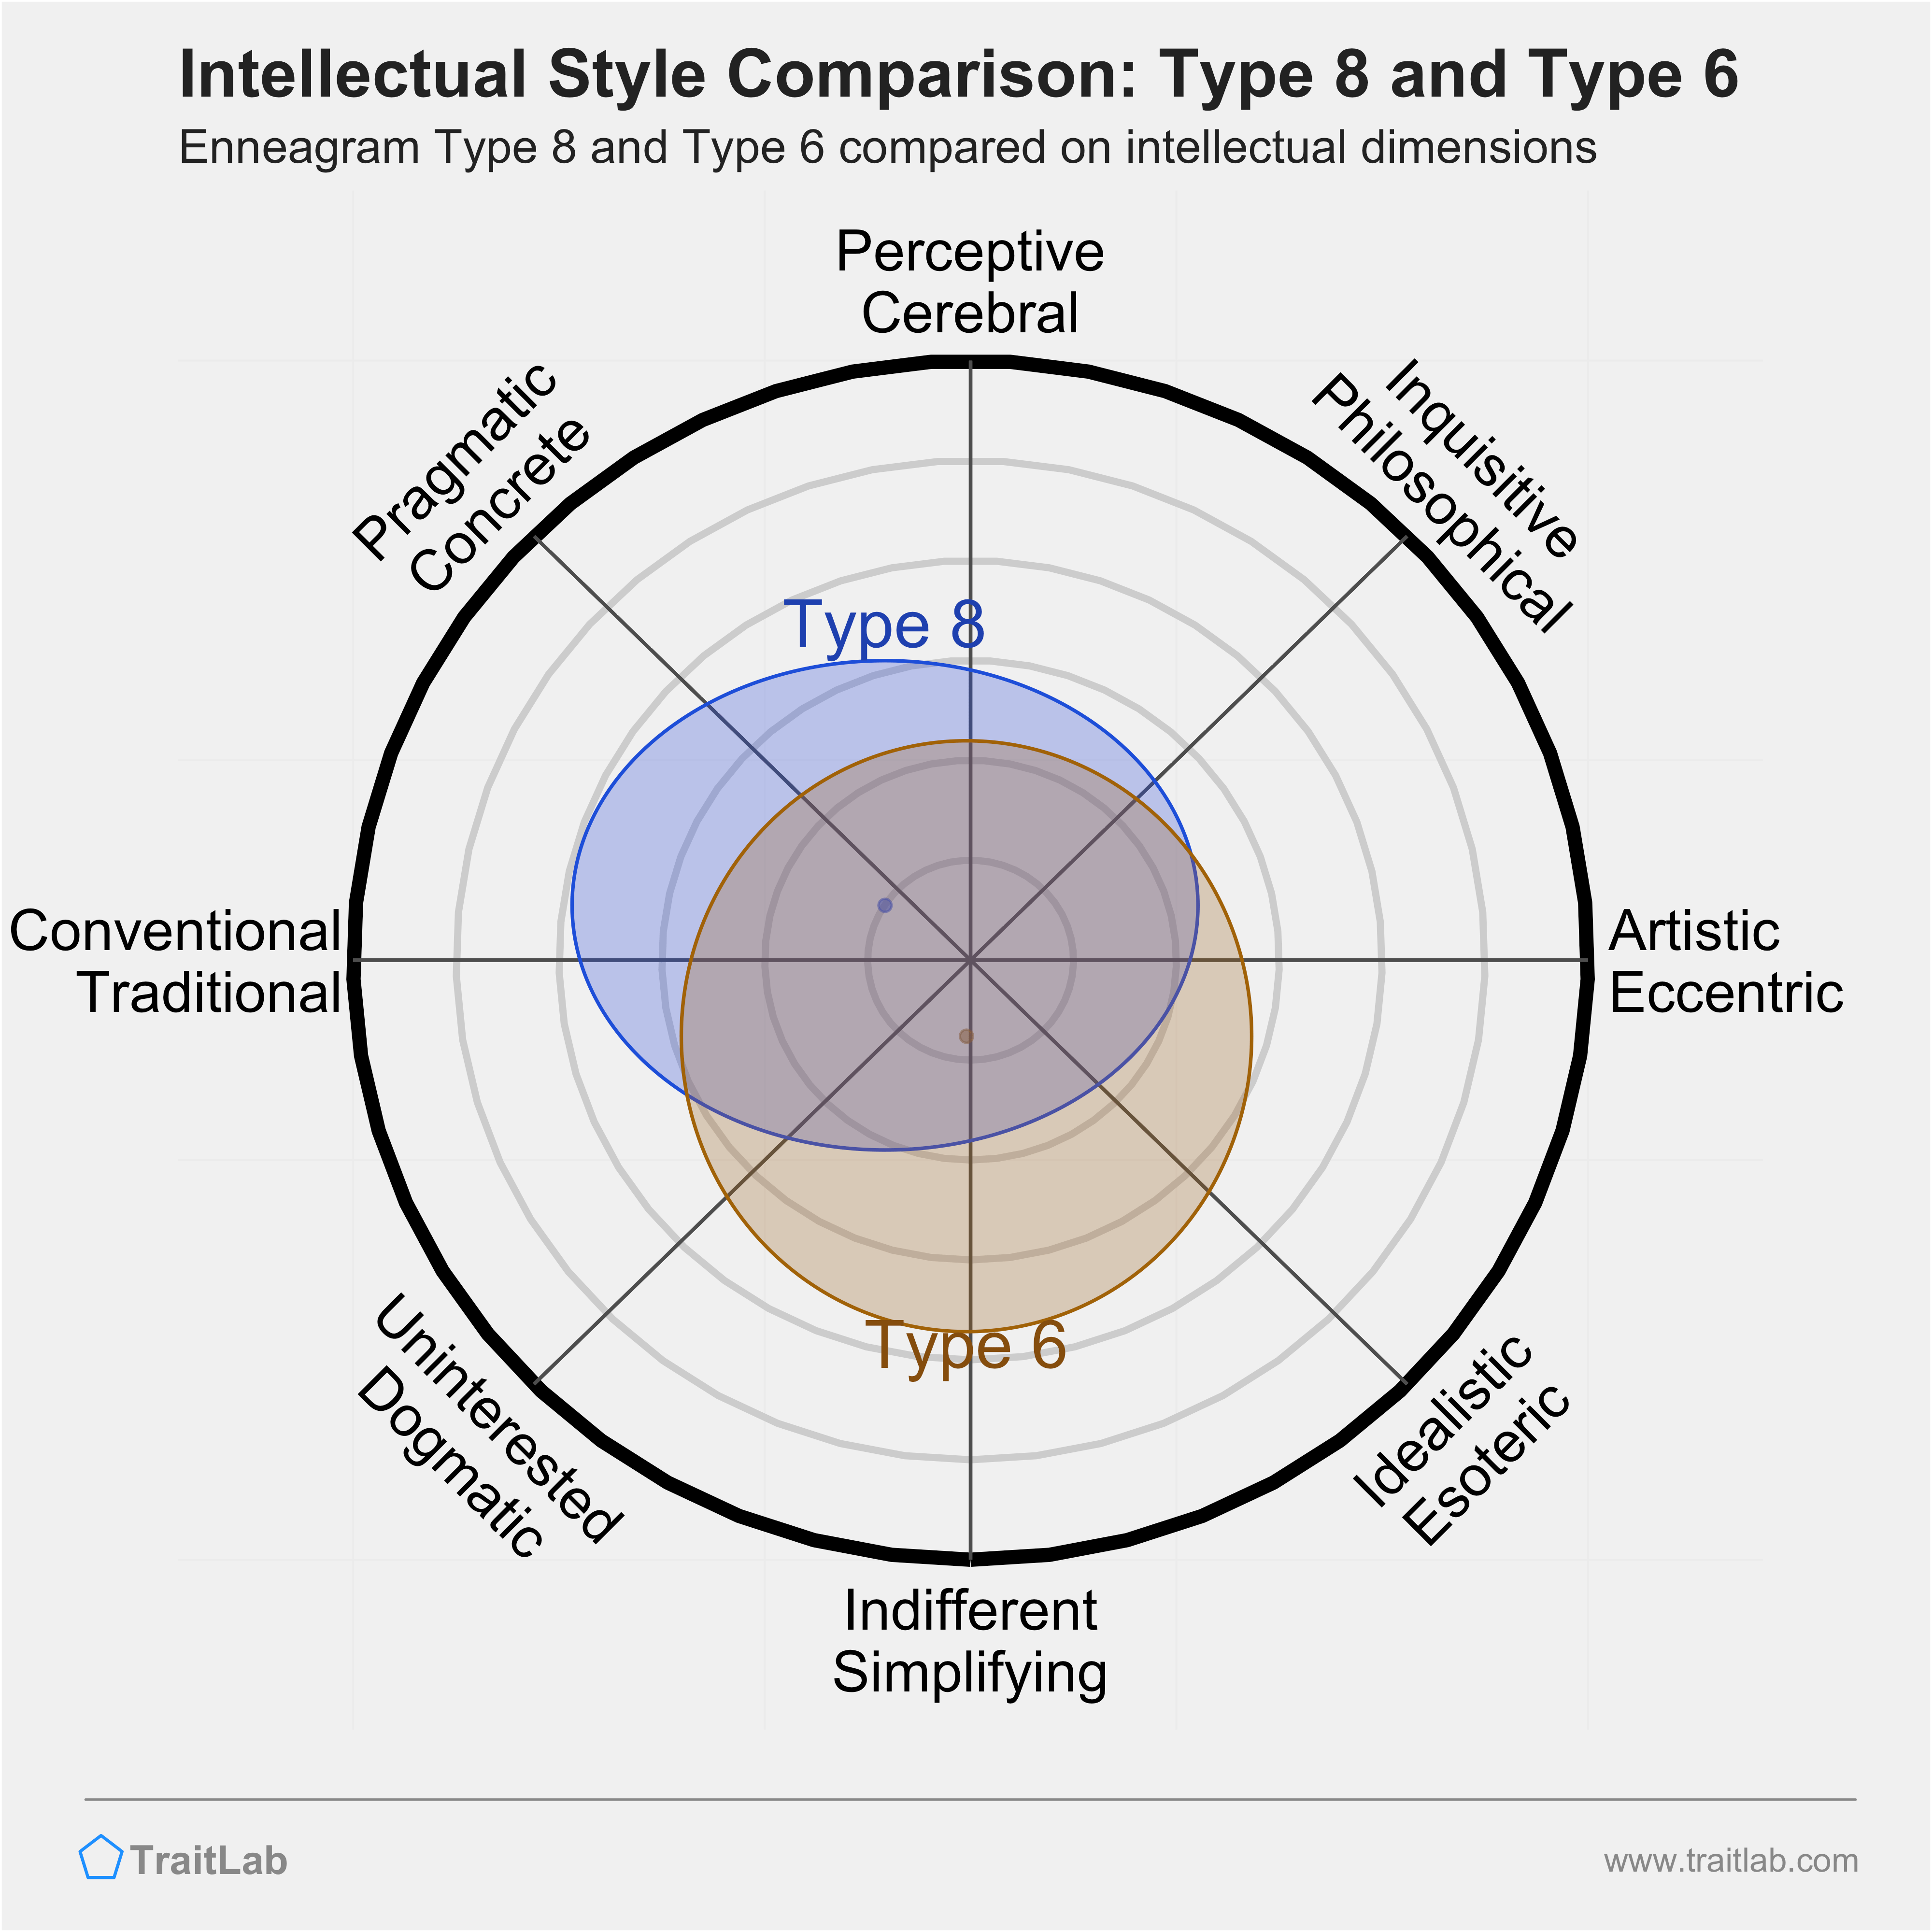 Type 8 and Type 6 comparison across intellectual dimensions